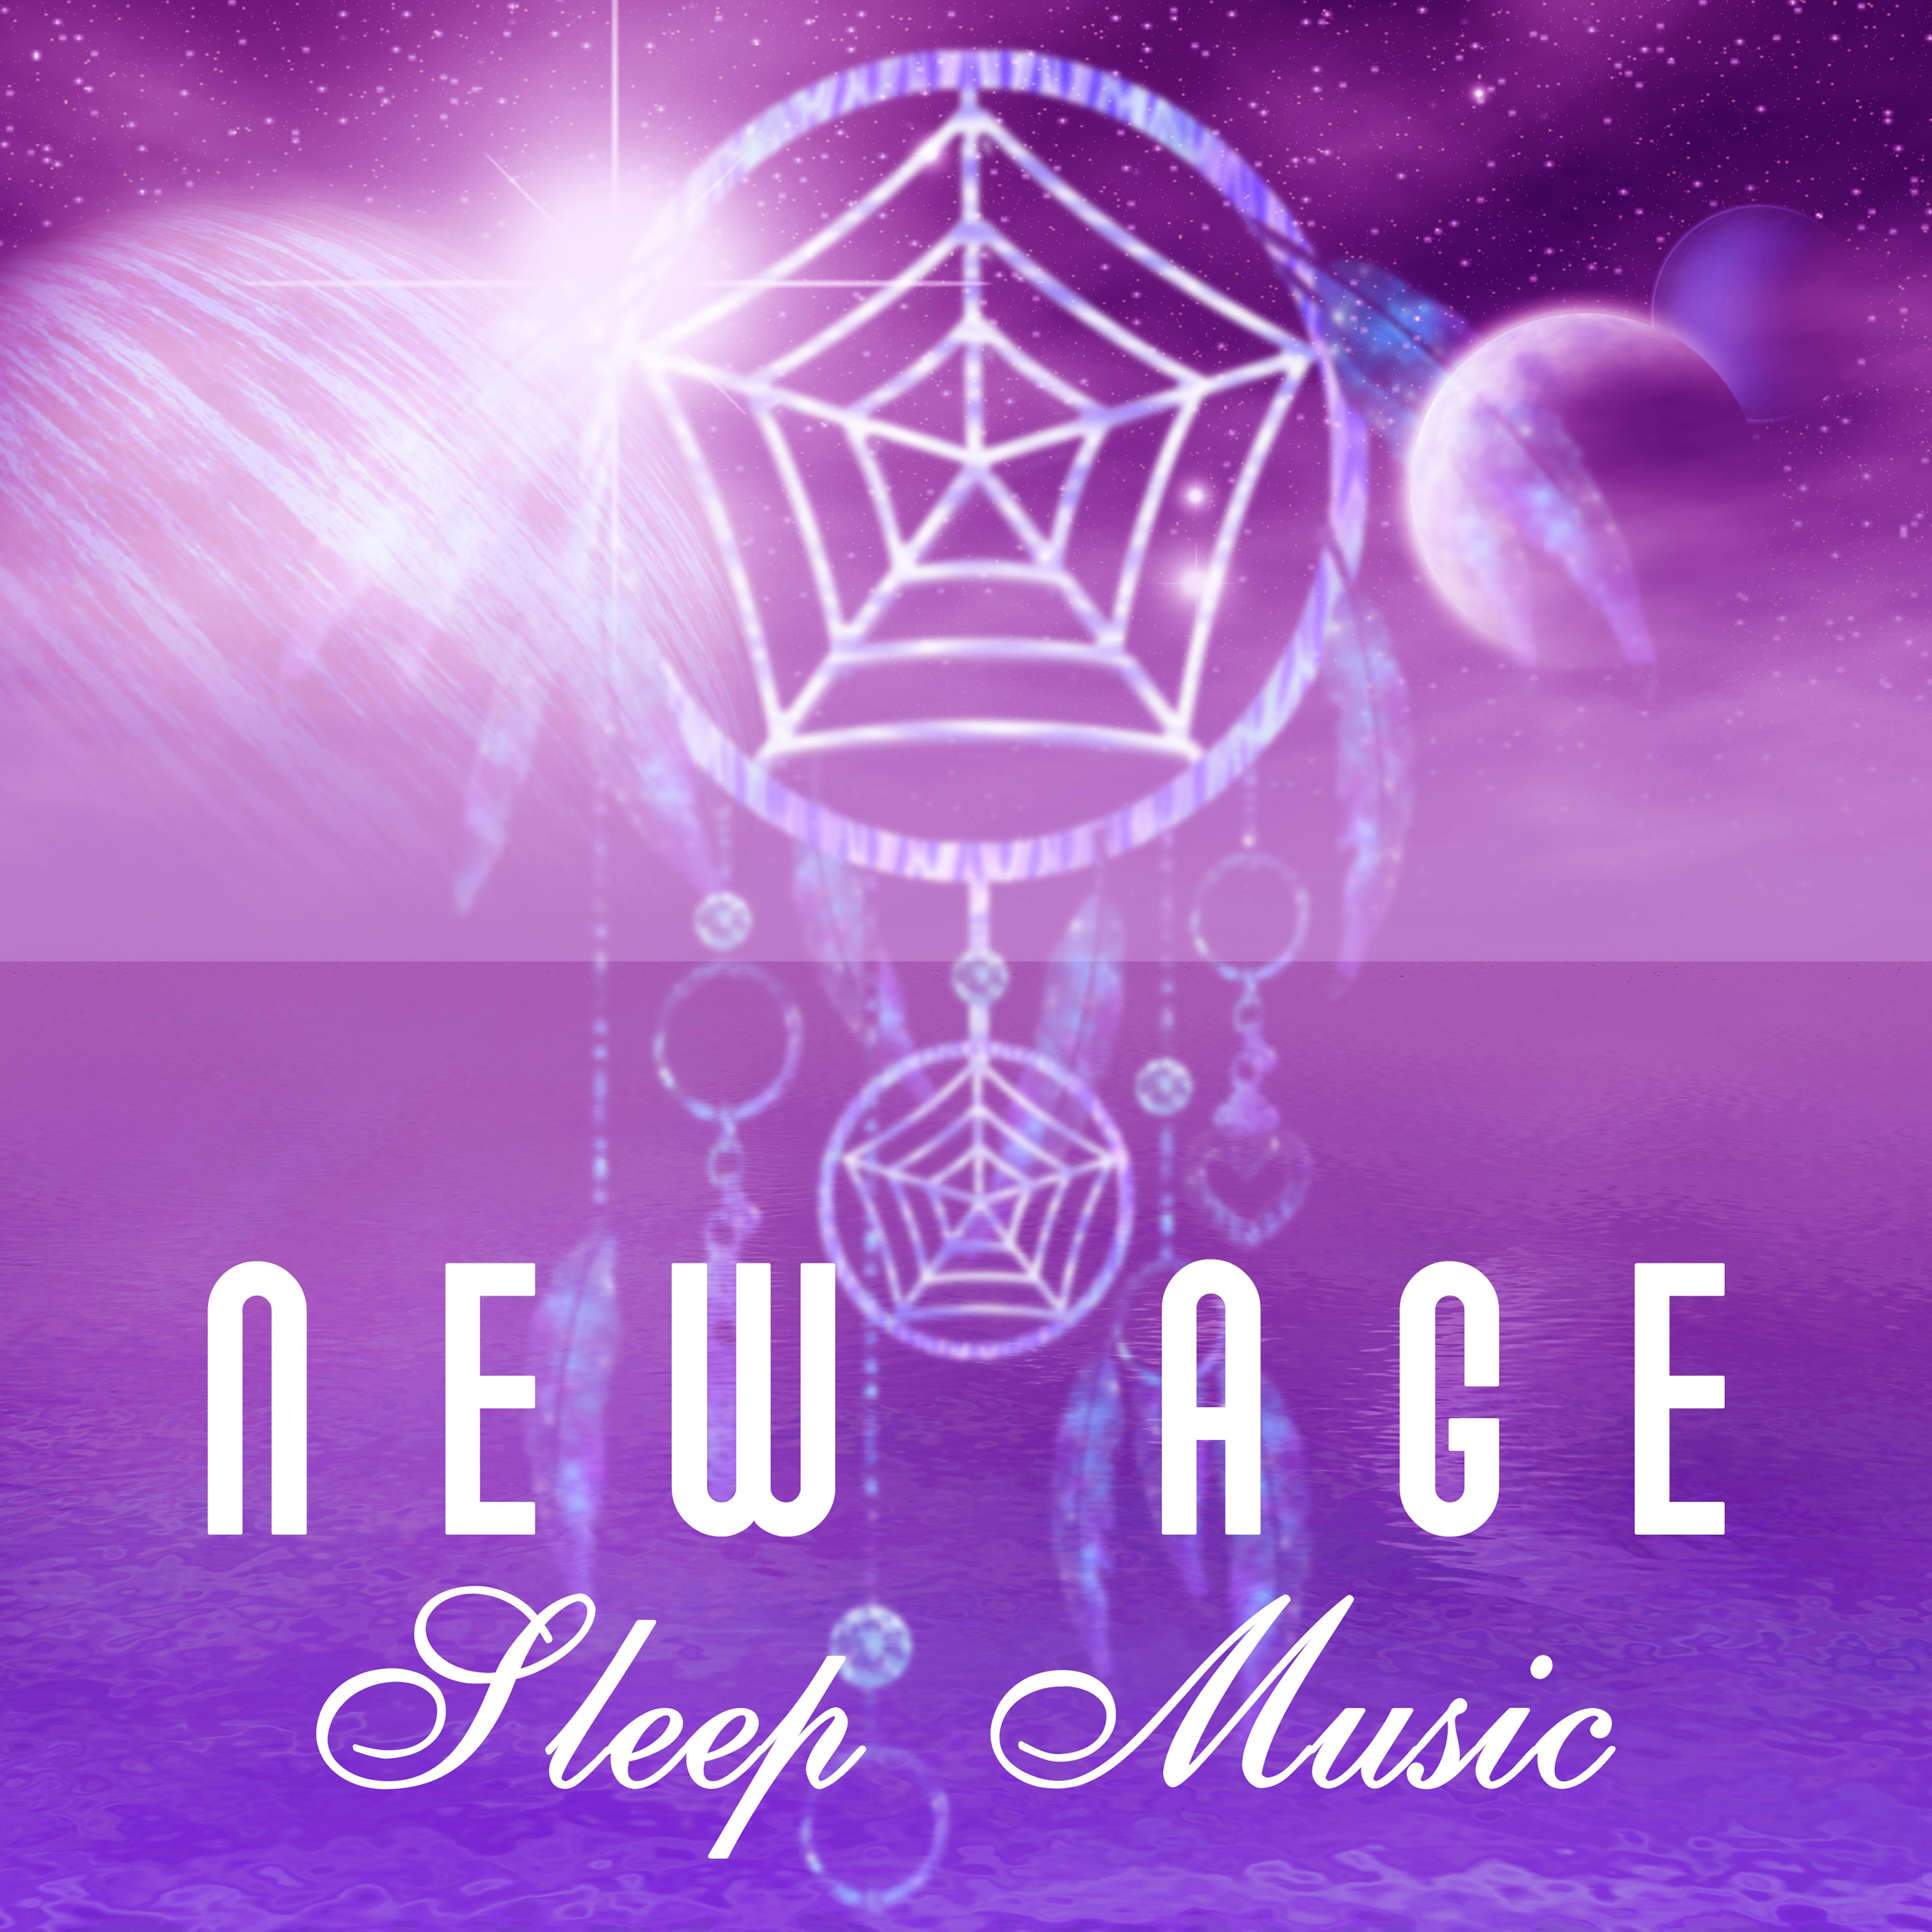 New Age Sleep Music – Best Sounds for Sleep, Calming Music to Rest, Sleeping Hours, Sweet Dreams